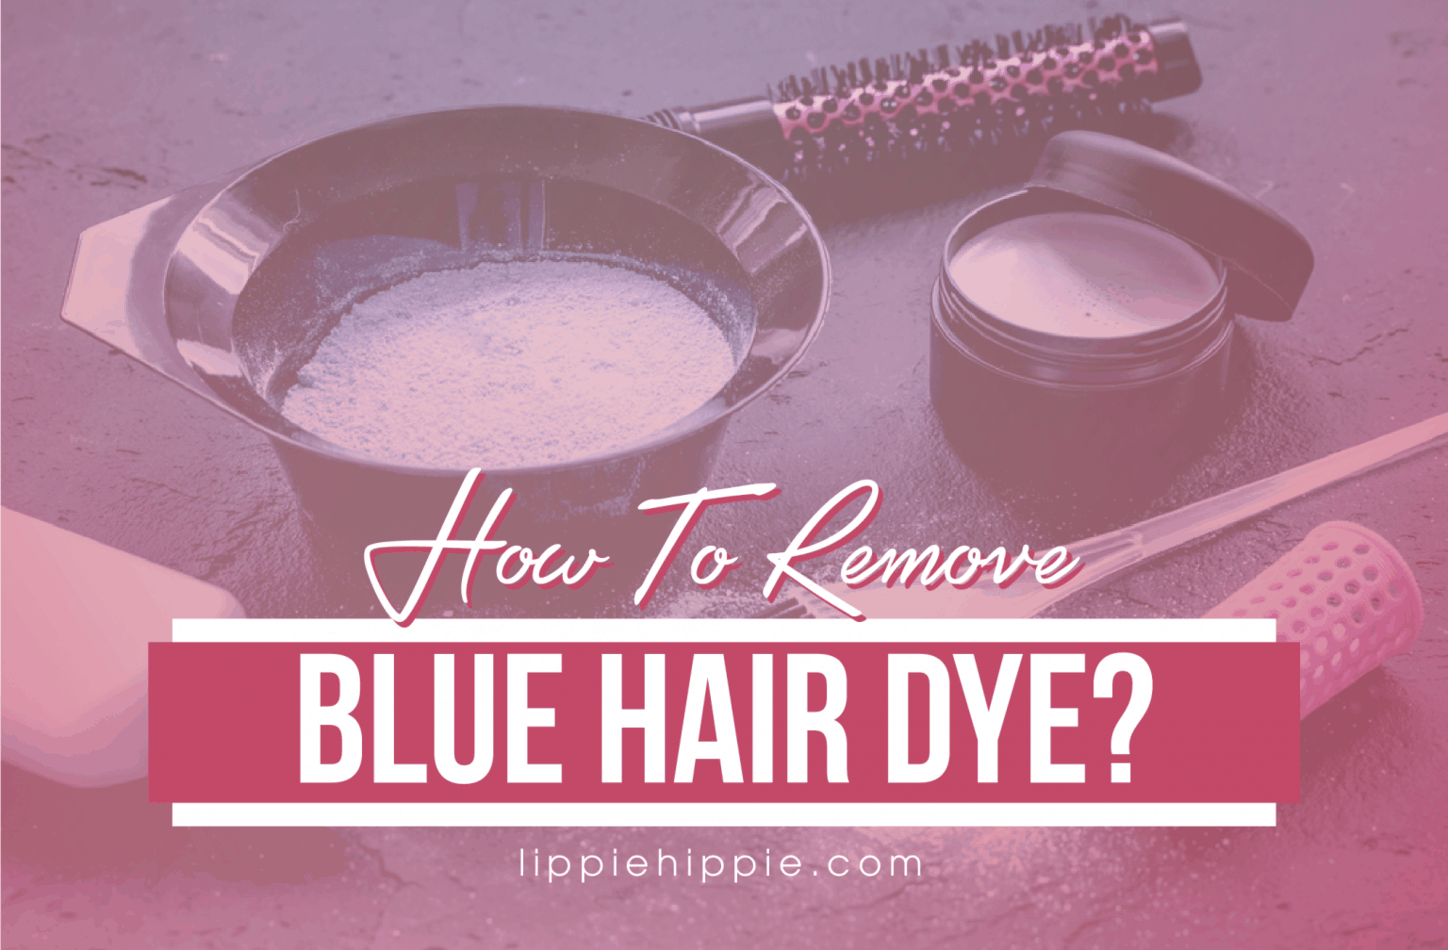 2. 5 Ways to Remove Blue Hair Dye - wide 8